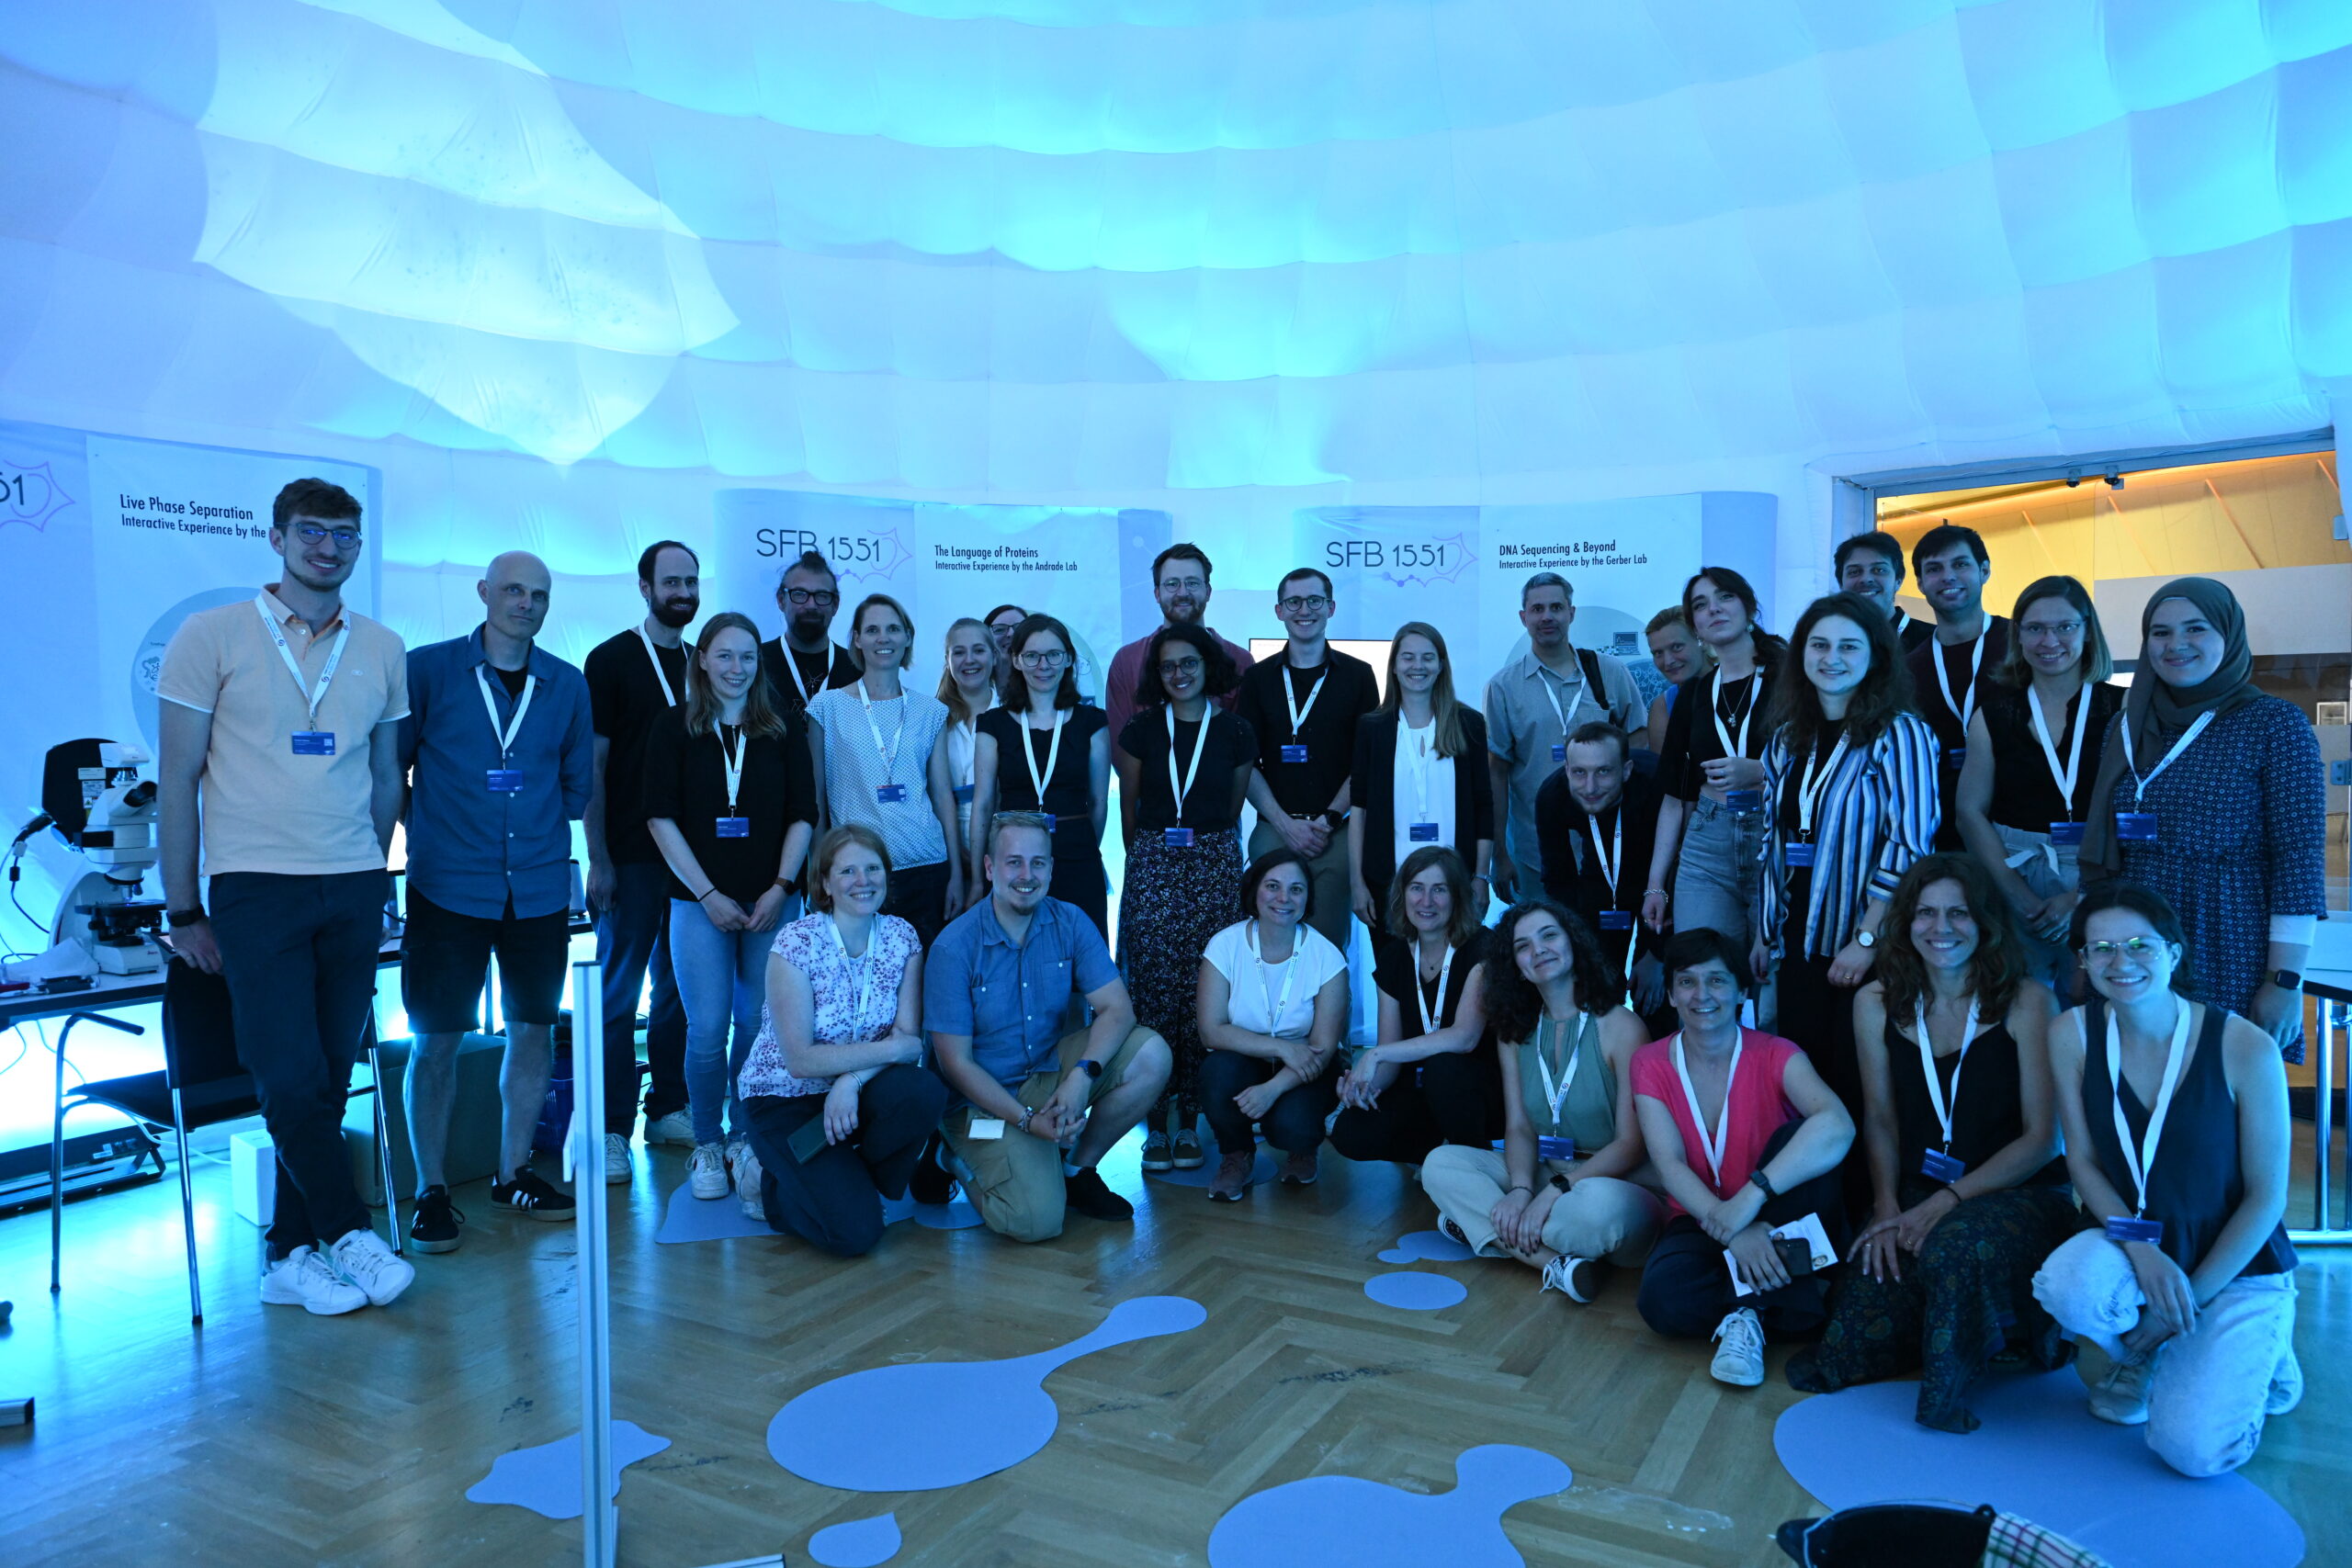 SFB1551 at the Curious24 Future Insight Conference